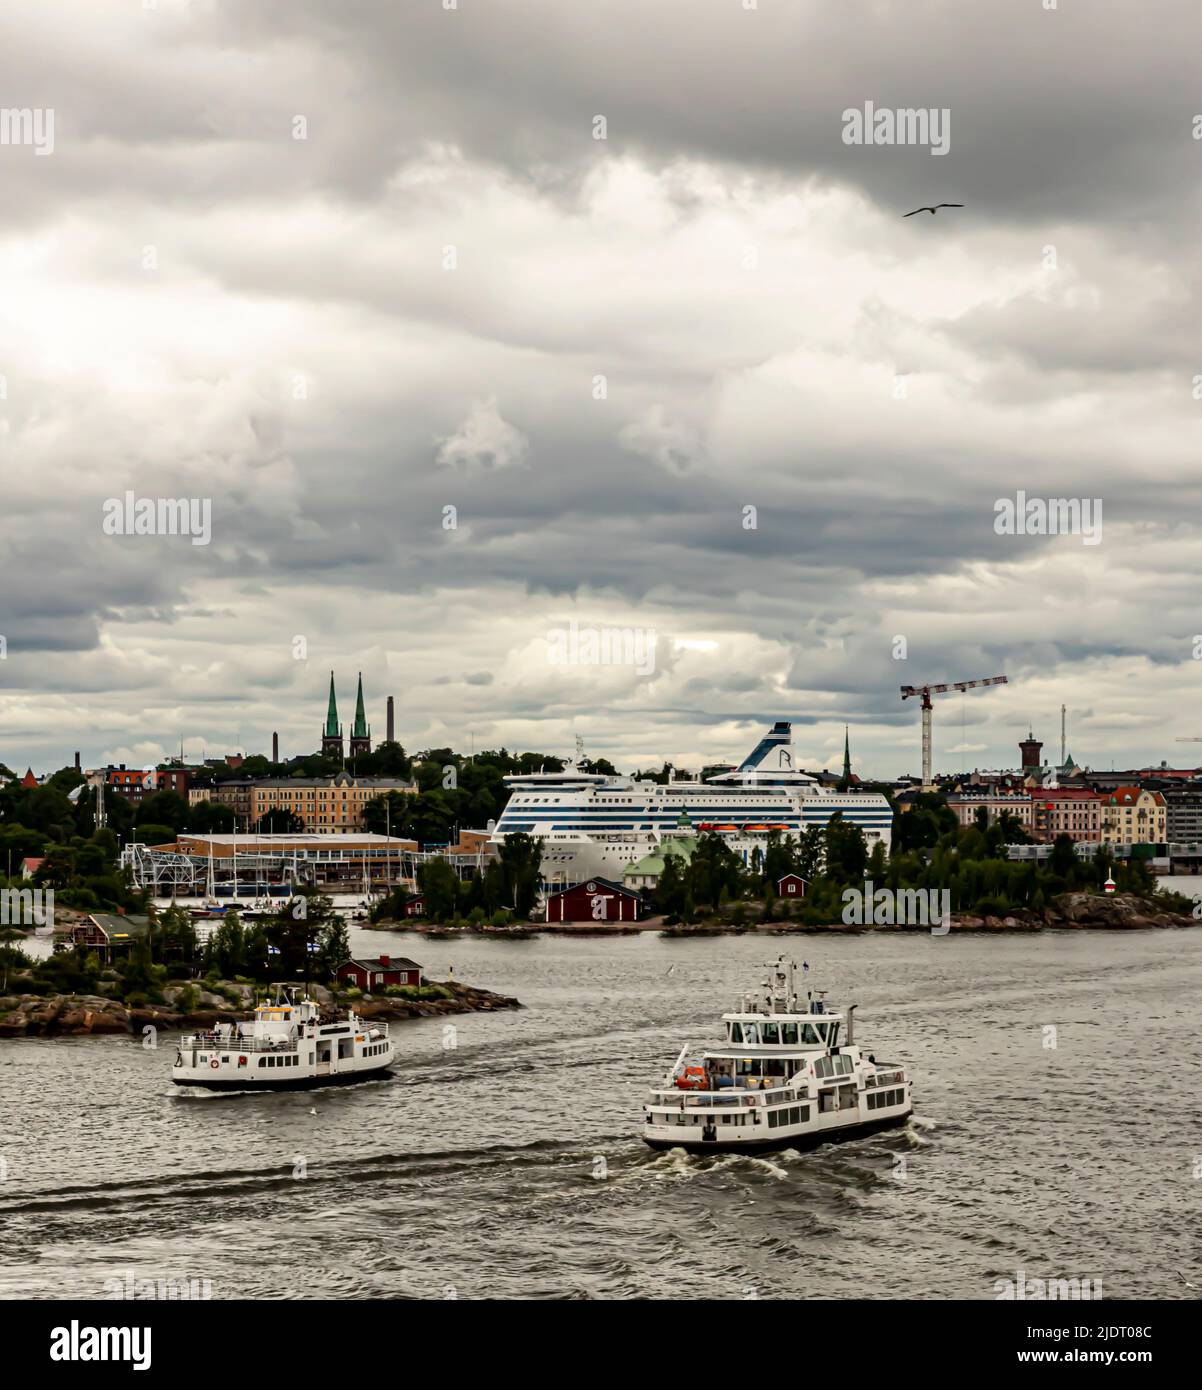 View of the South Harbour of Helsinki, Finland. Ferries in the foreground. Stock Photo